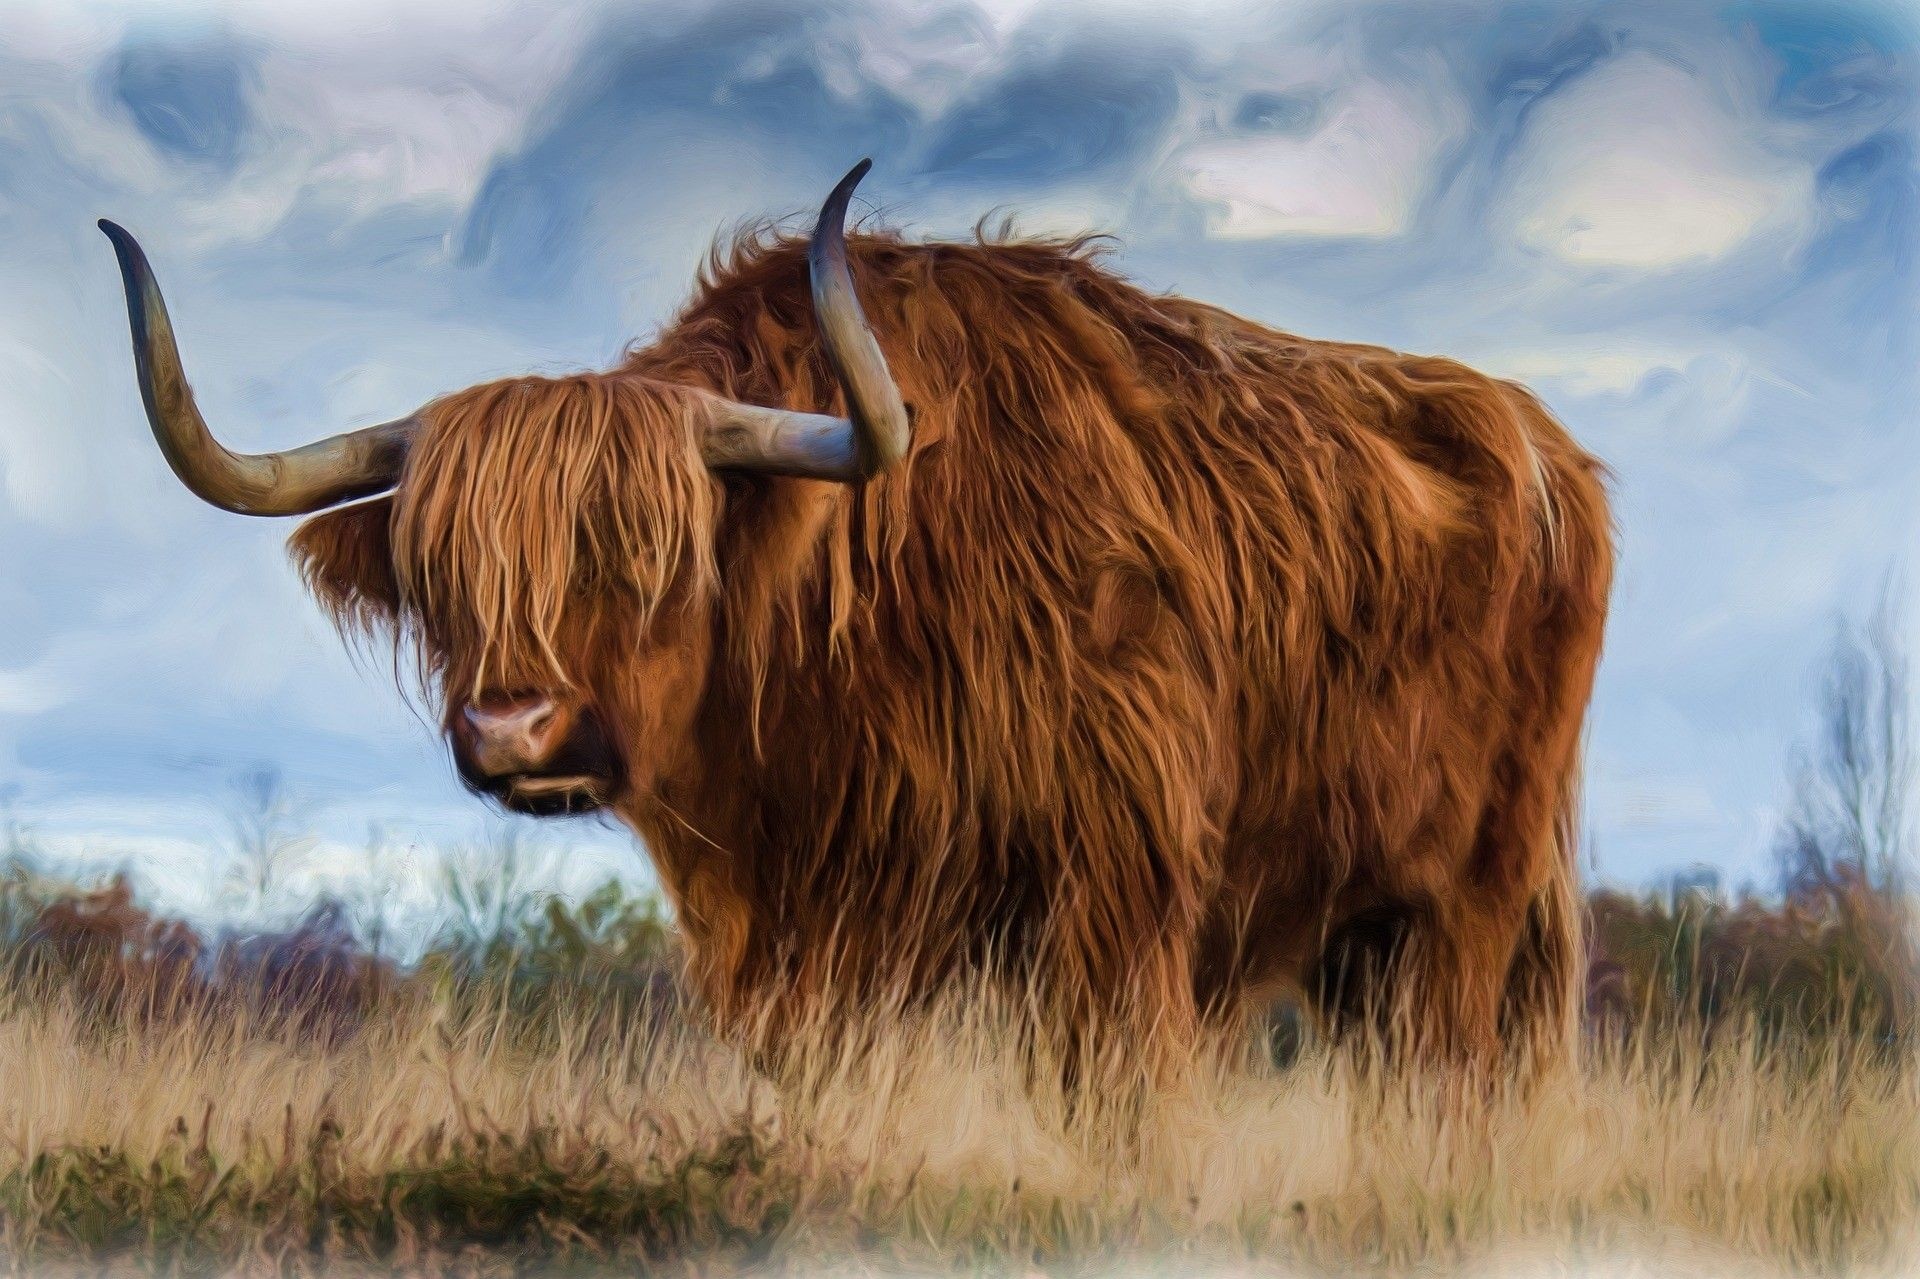 Highland cow, Rustic charm, Grassy landscapes, Nature's masterpiece, 1920x1280 HD Desktop